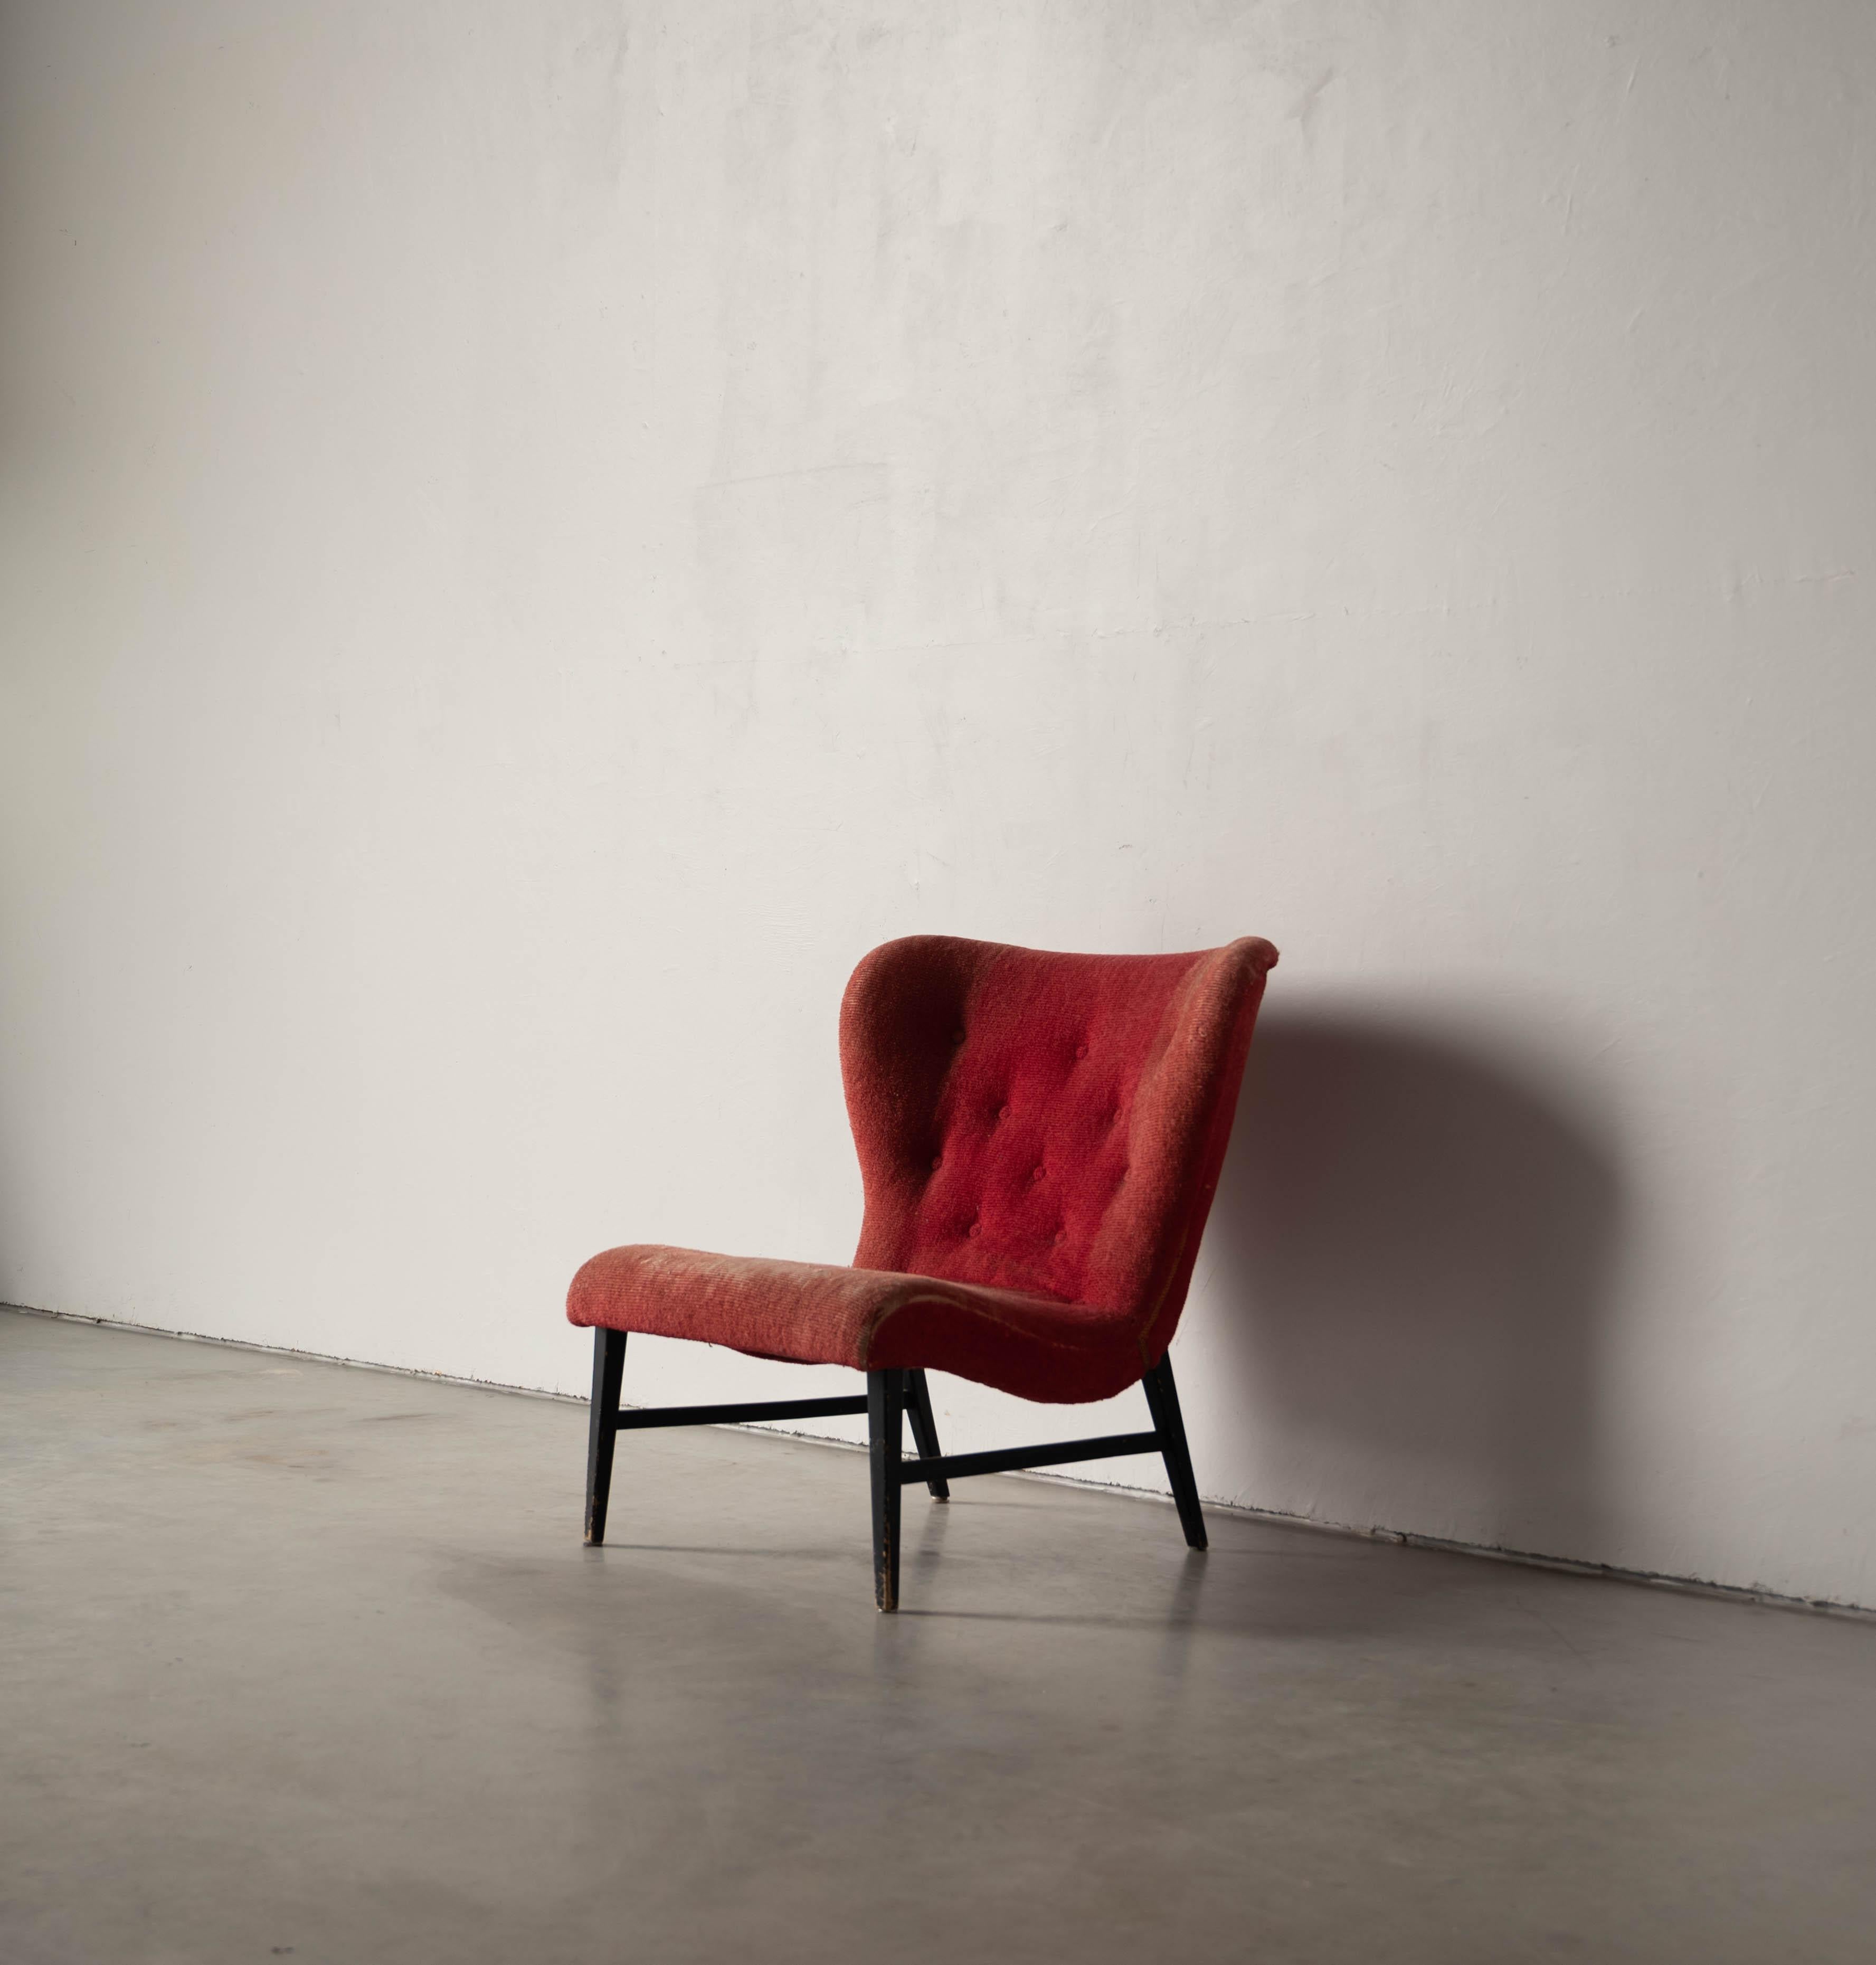 A slipper or lounge chair in dark-stained wood and red velvet. Design attributed to Erik Karlén, presumably produced by Firma Rumsinteriör, Sweden, 1940s.